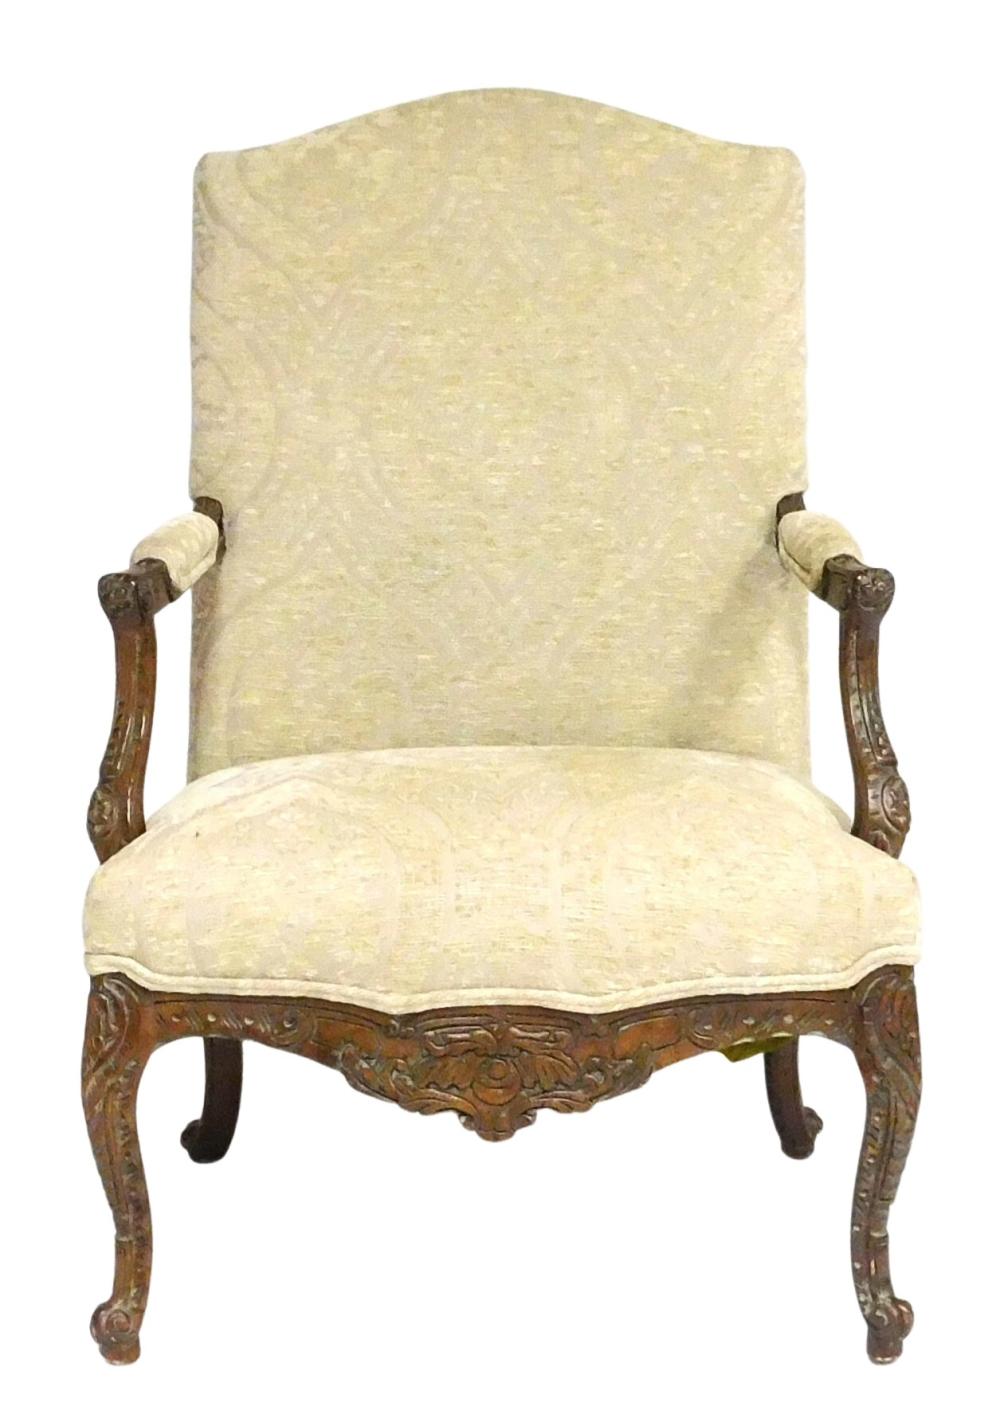 CABOT HOUSE OCCASIONAL ARMCHAIR  2e2d46